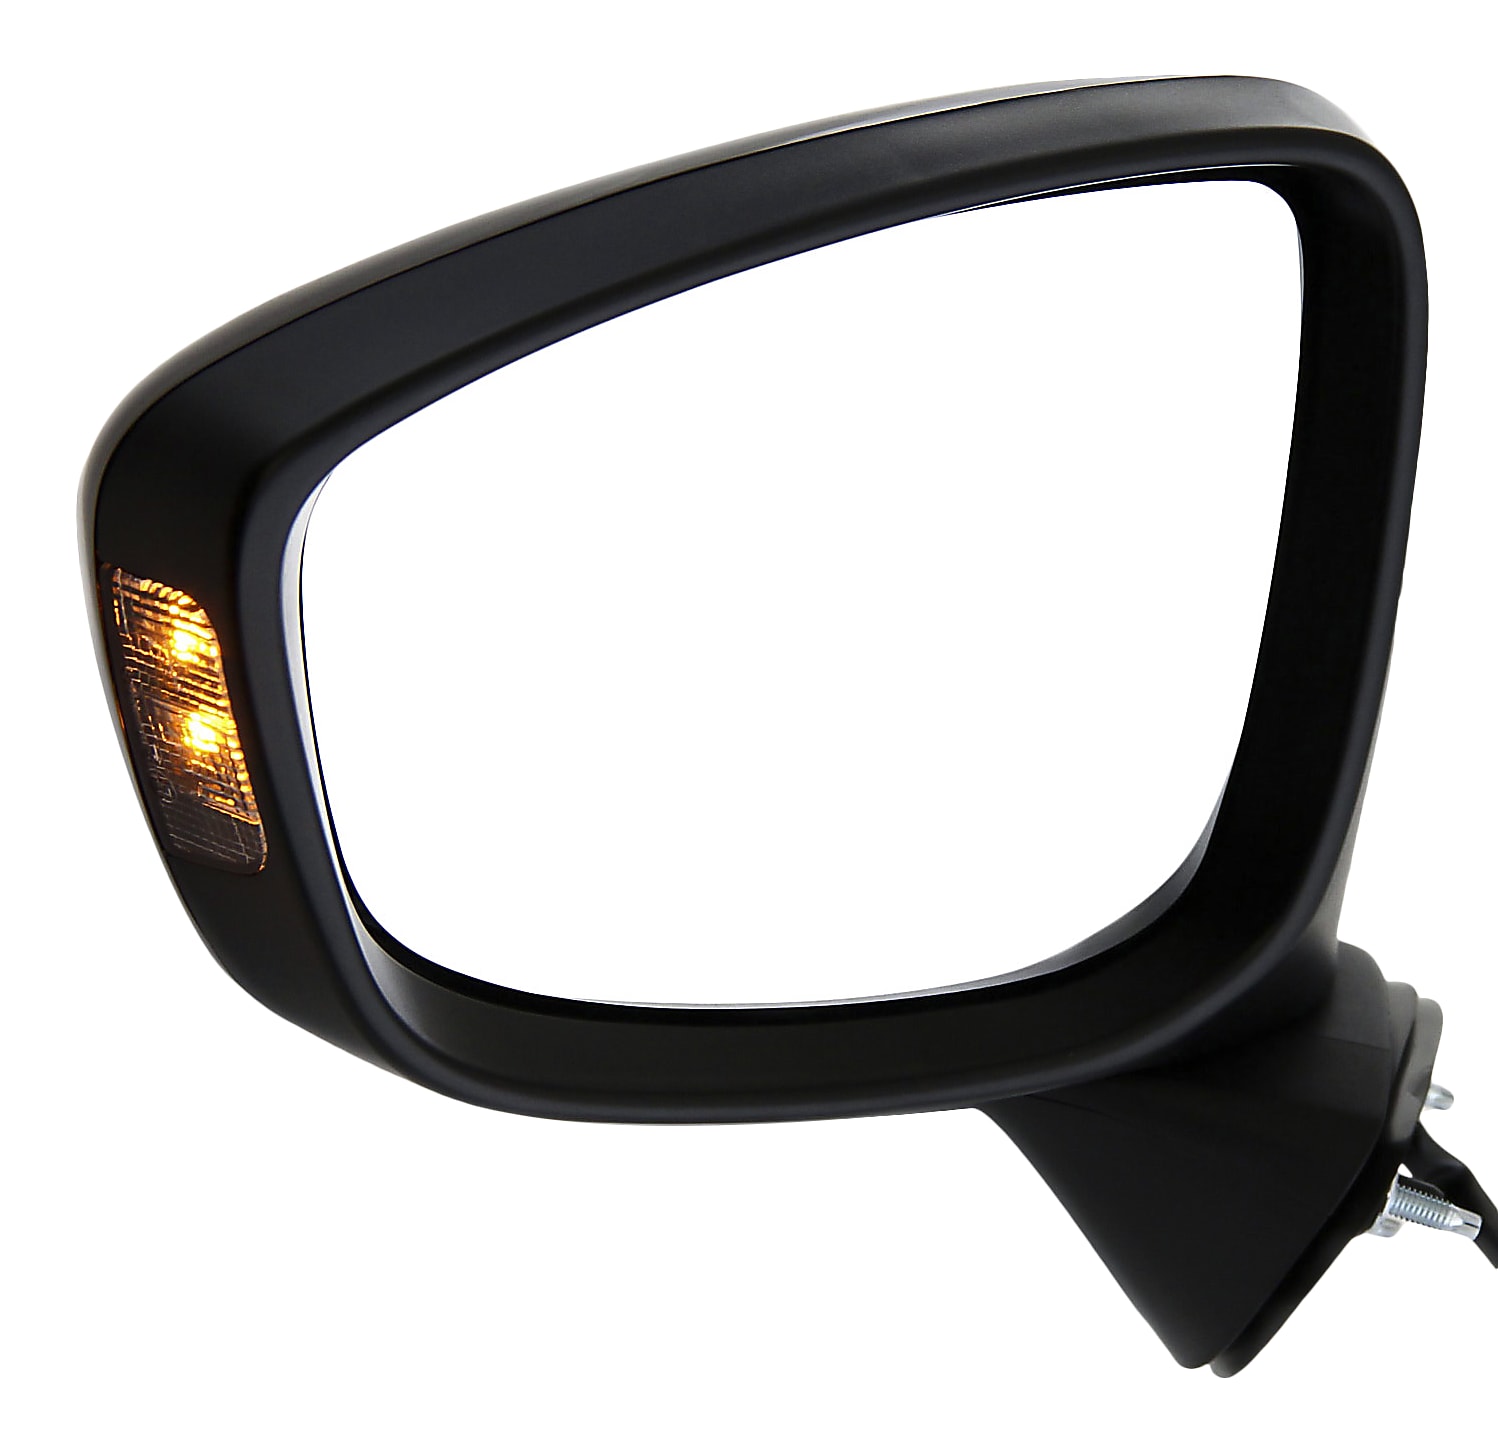 w/Out Blind spot Detection w/Turn Signal Foldaway Fit System Driver Side Mirror for Mazda CX-5 Black w/PTM Cover Power 